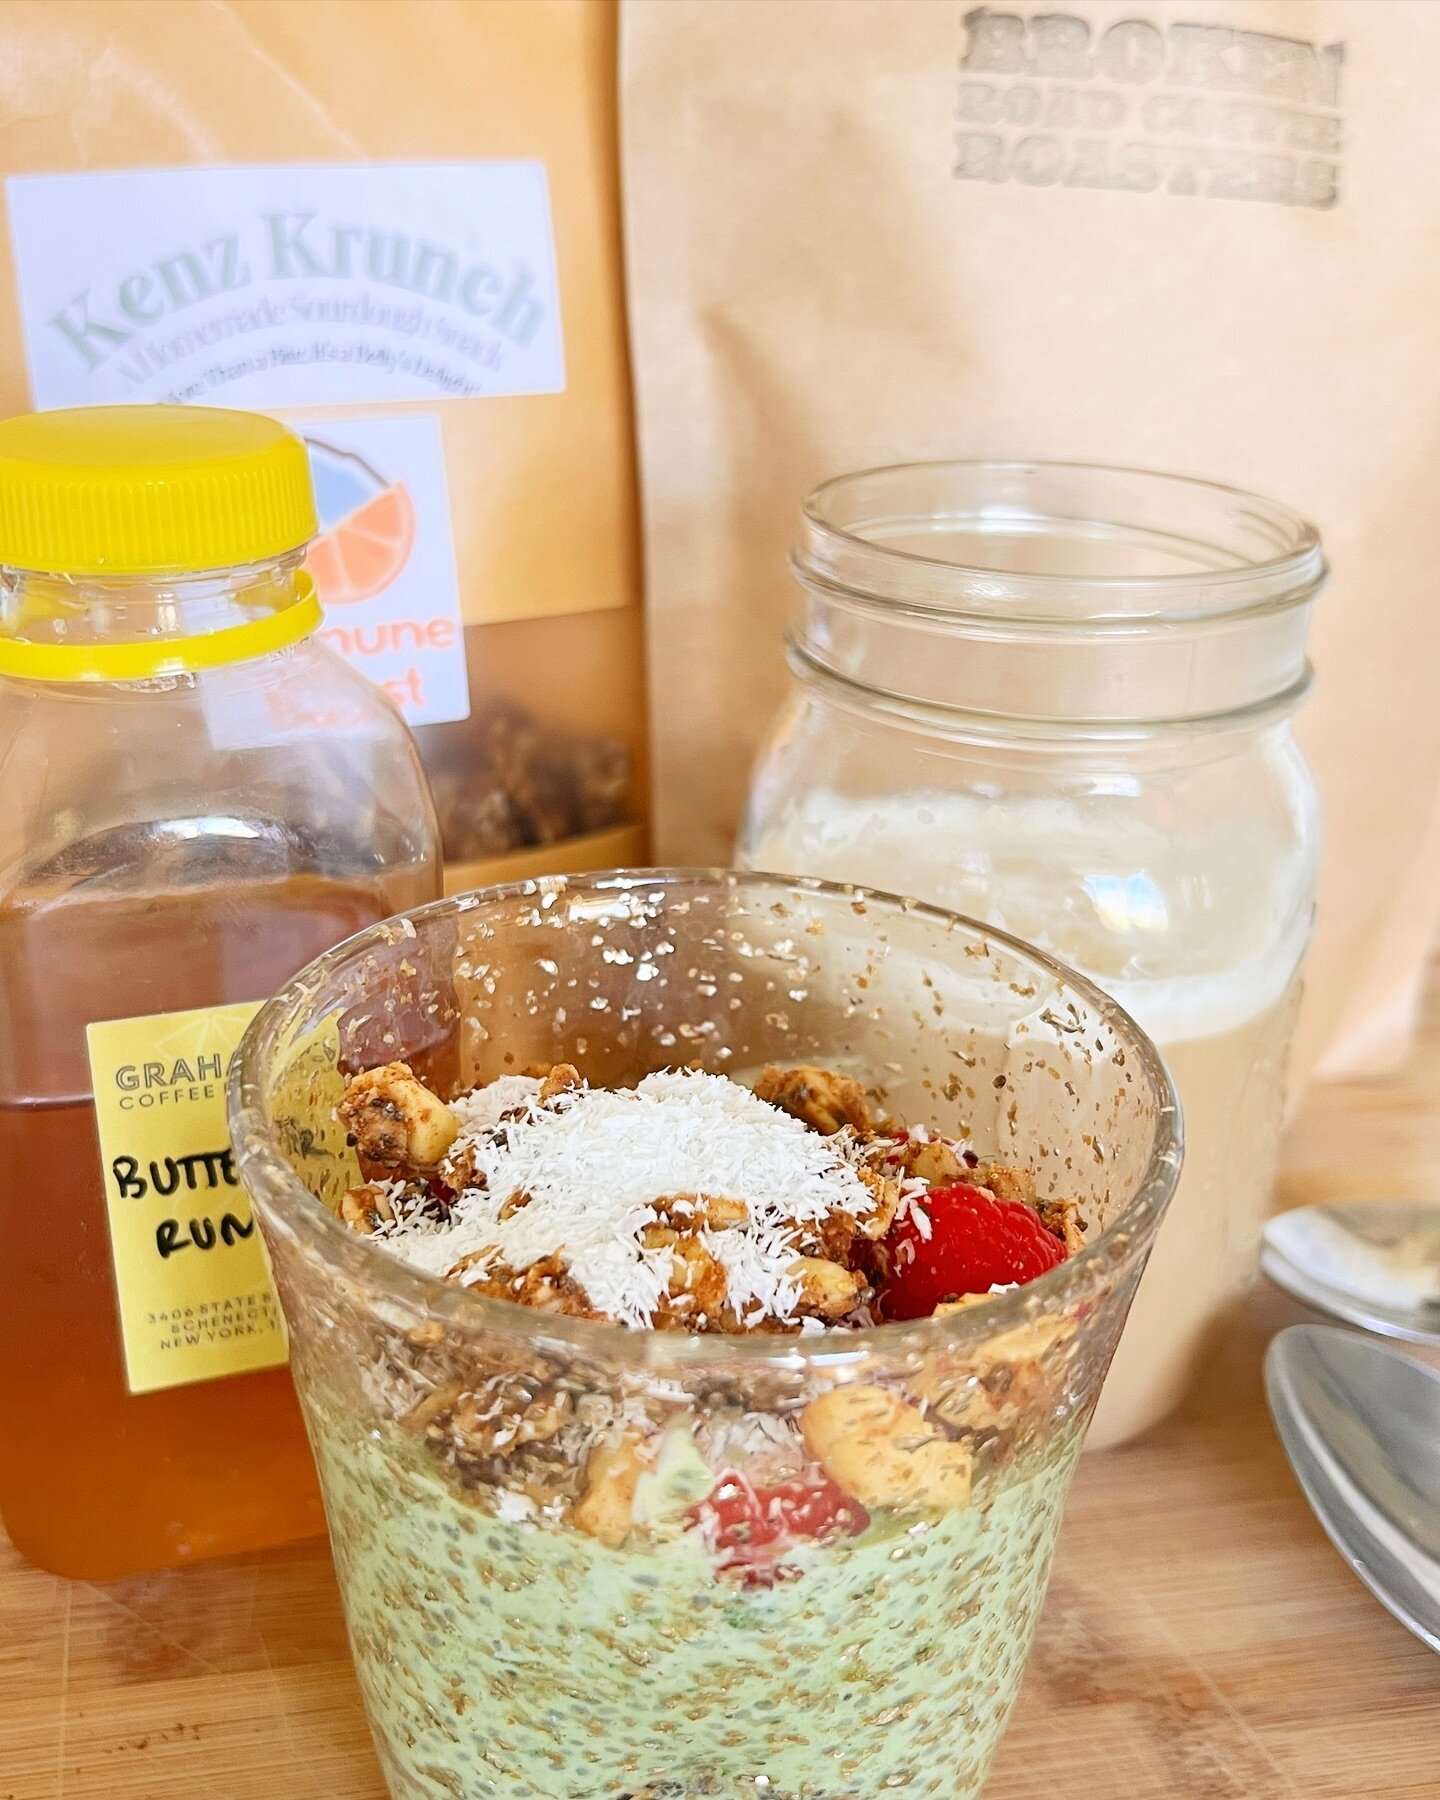 It&rsquo;s your final push to the weekend, and you need an extra caffeine boost. DON&rsquo;T WORRY, I GOT YOU!!! This matcha chia pudding is here to help you out&mdash;and if you&rsquo;re like me, you probably need to make this delicious butter rum l